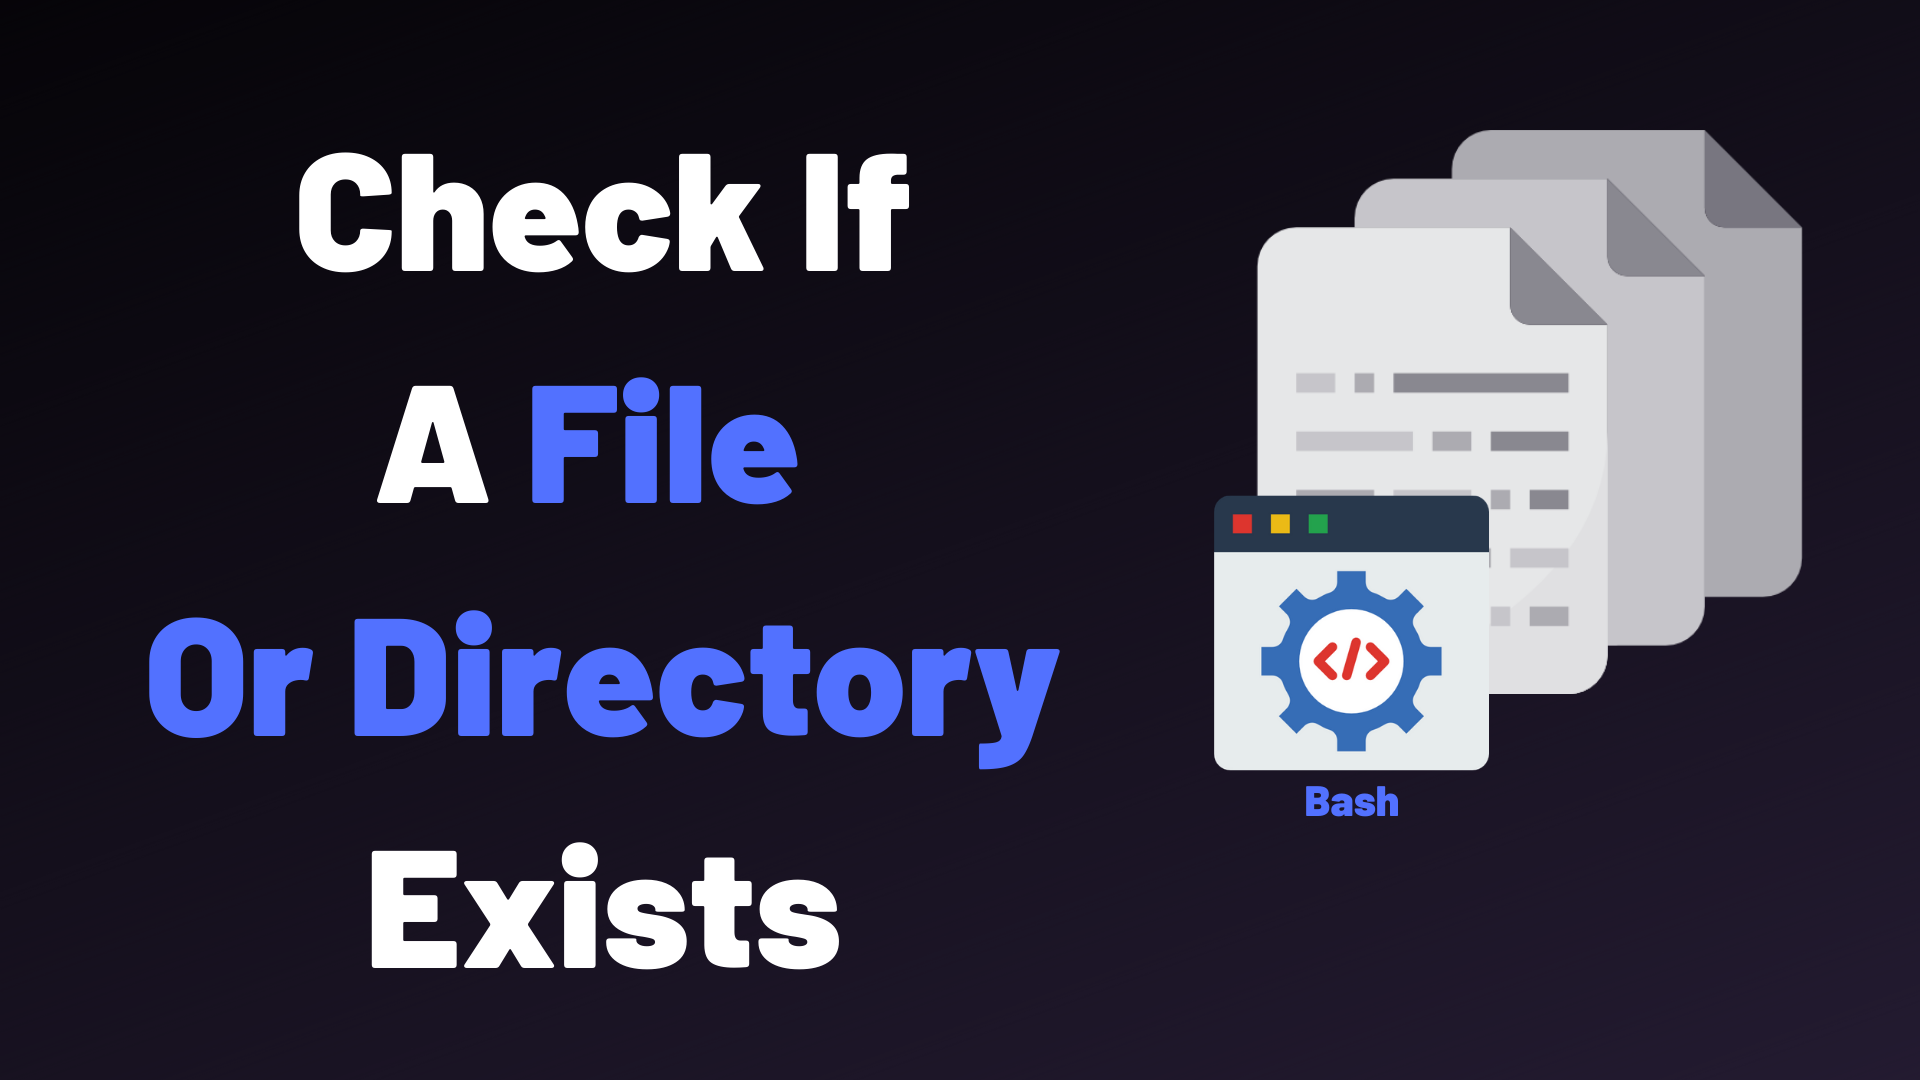 How To Check If File or Directory Exists in Bash